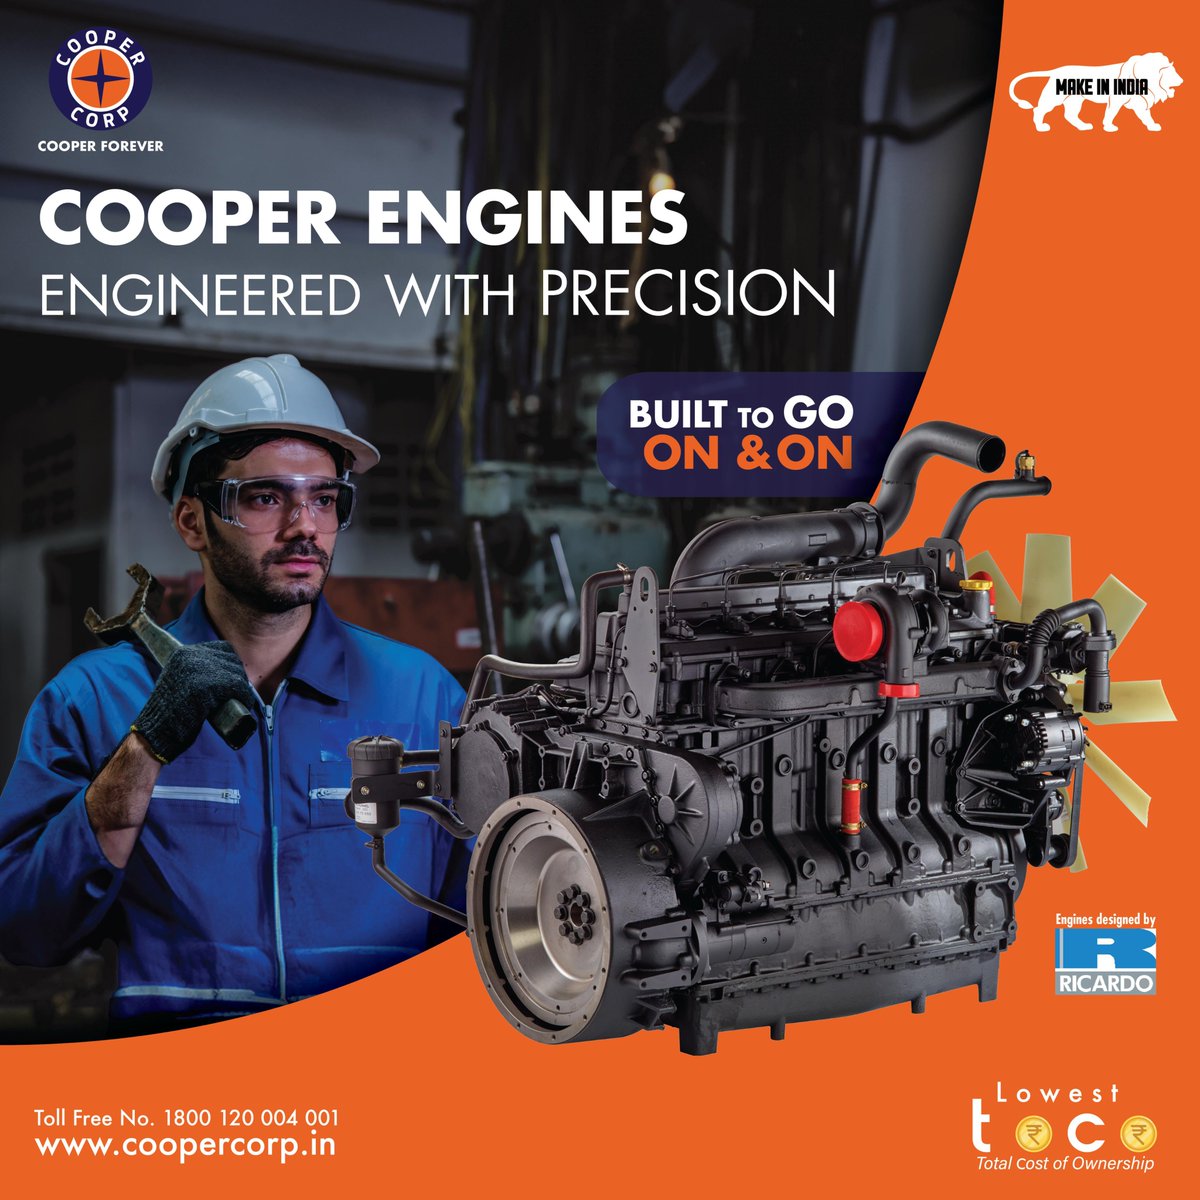 Cooper Engines - Precision engineered for performance that's unmatched.

#sabseoopercooper
#engines
#cooperengines
#precisionengineering 
#engineperformance
 #powerwithprecision